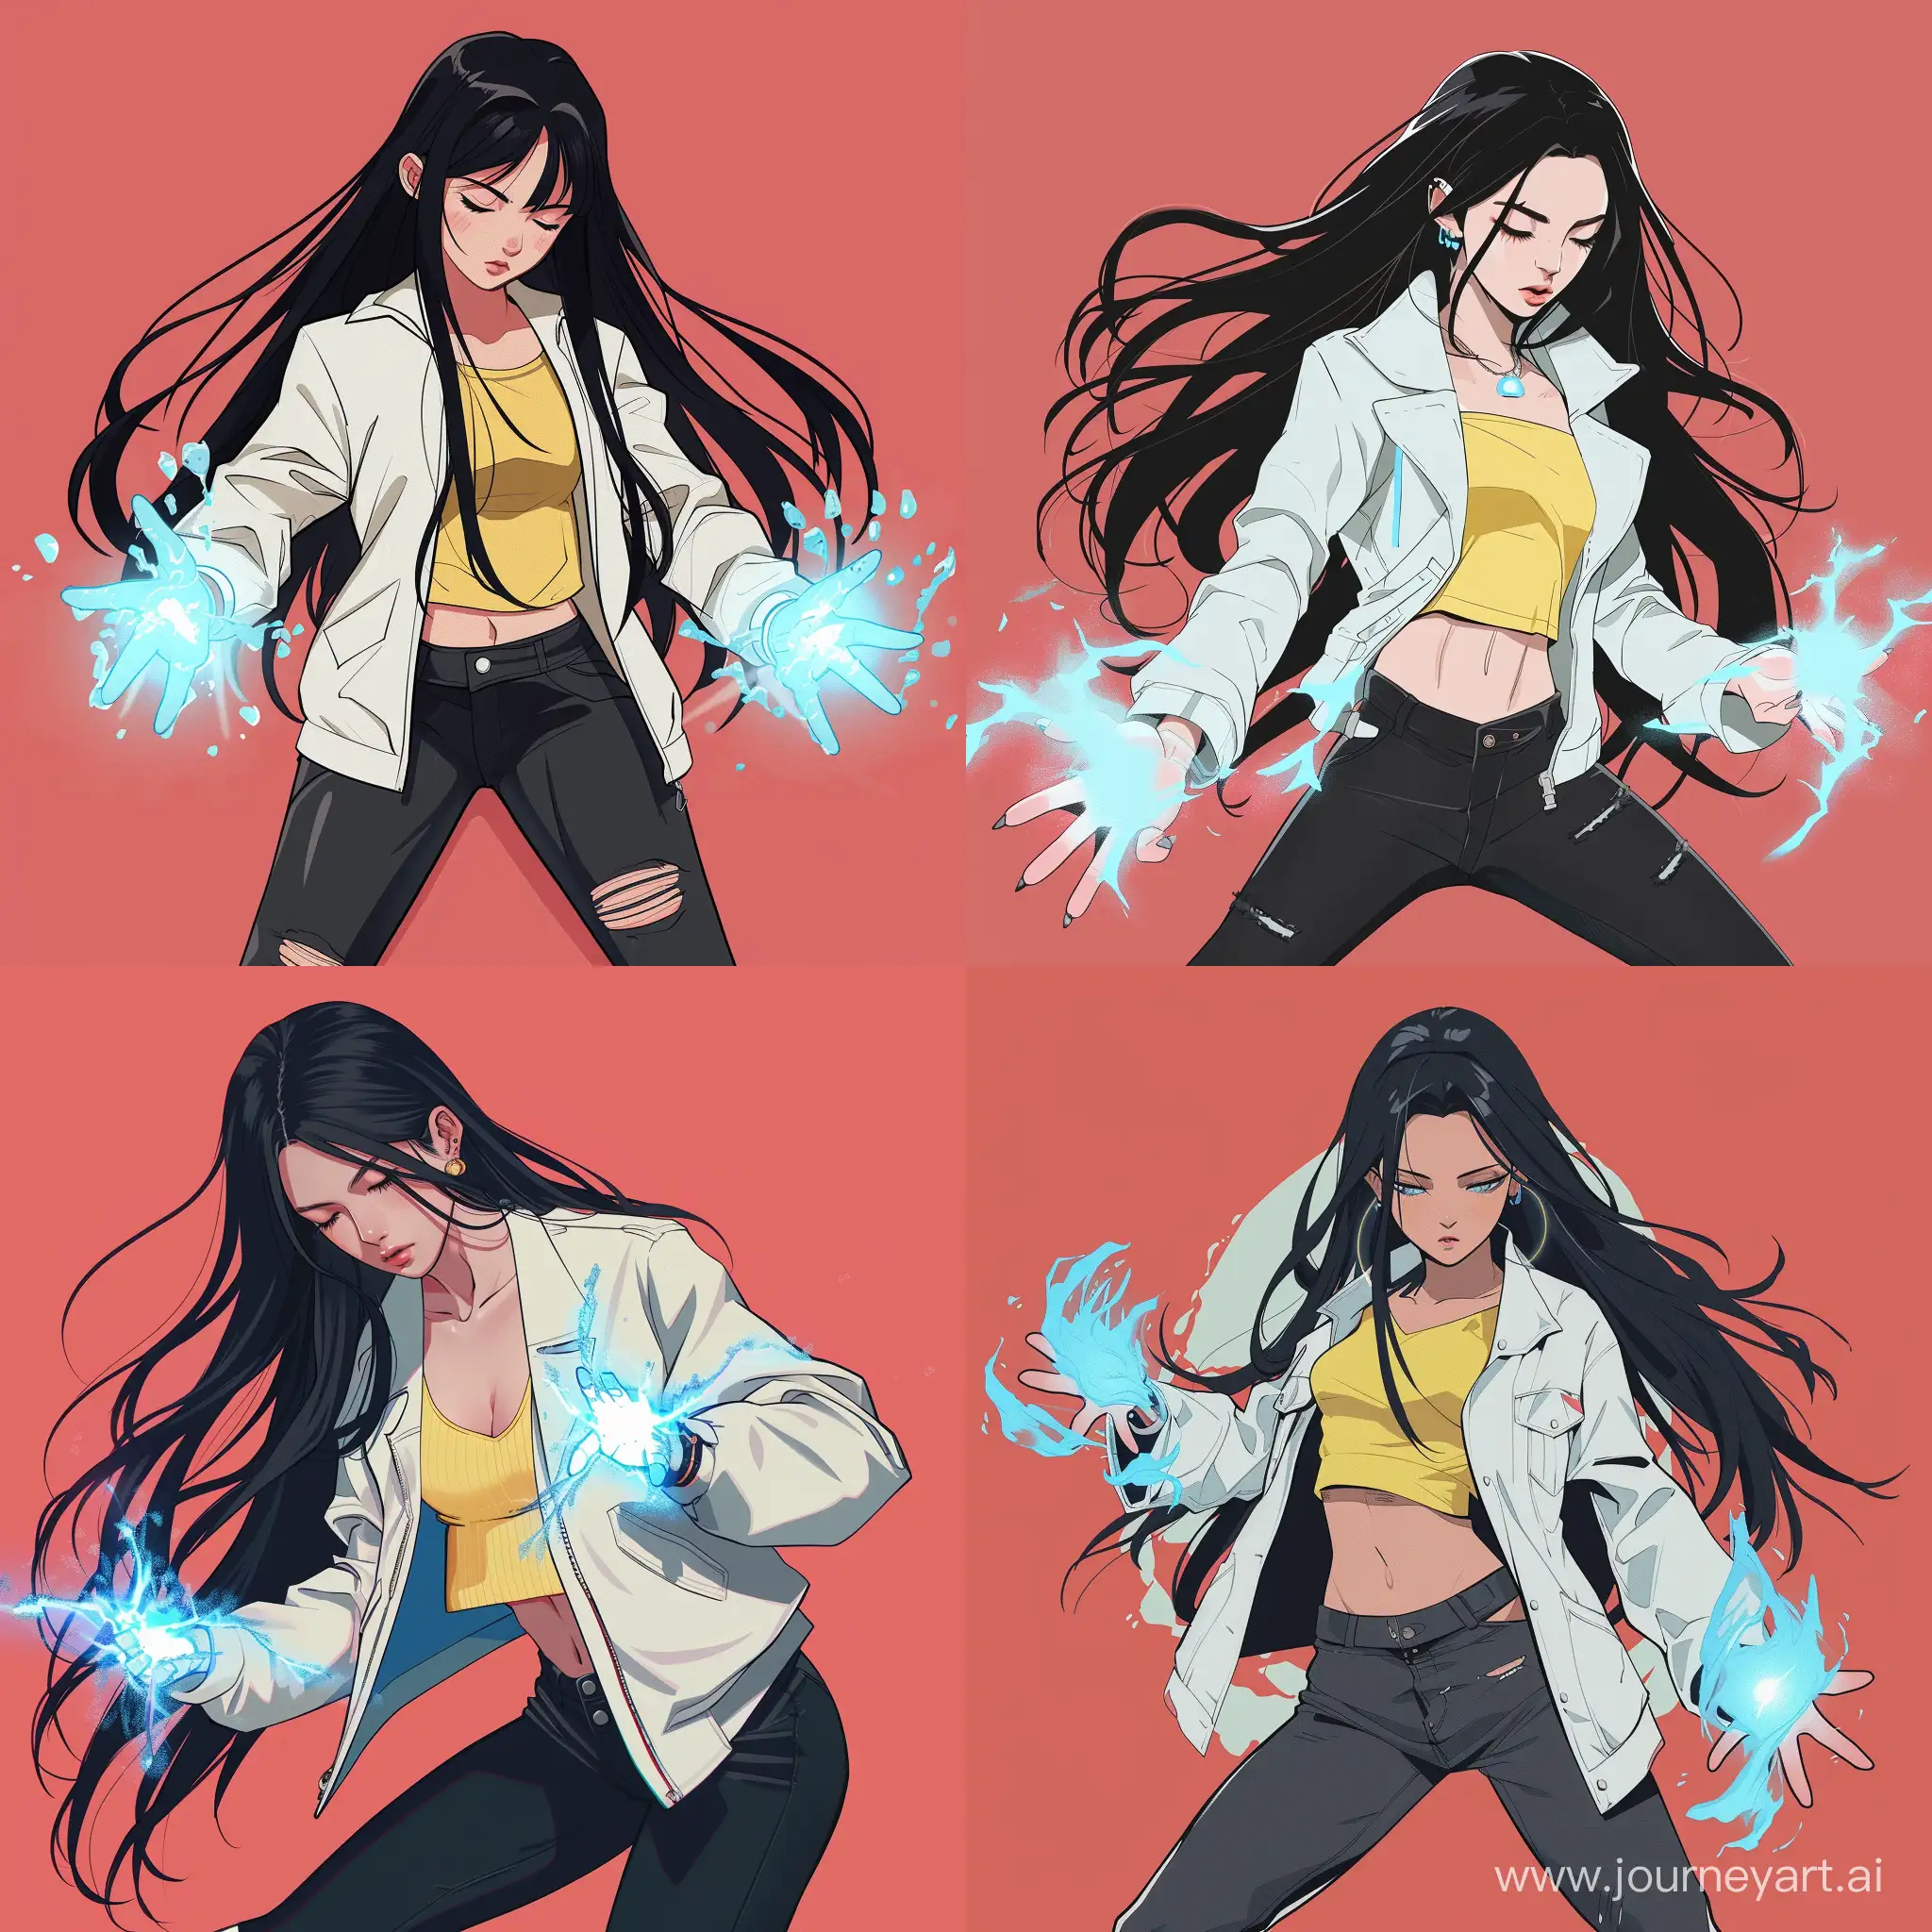 Anime-Woman-with-Electric-Powers-in-White-Jacket-and-Black-Pants